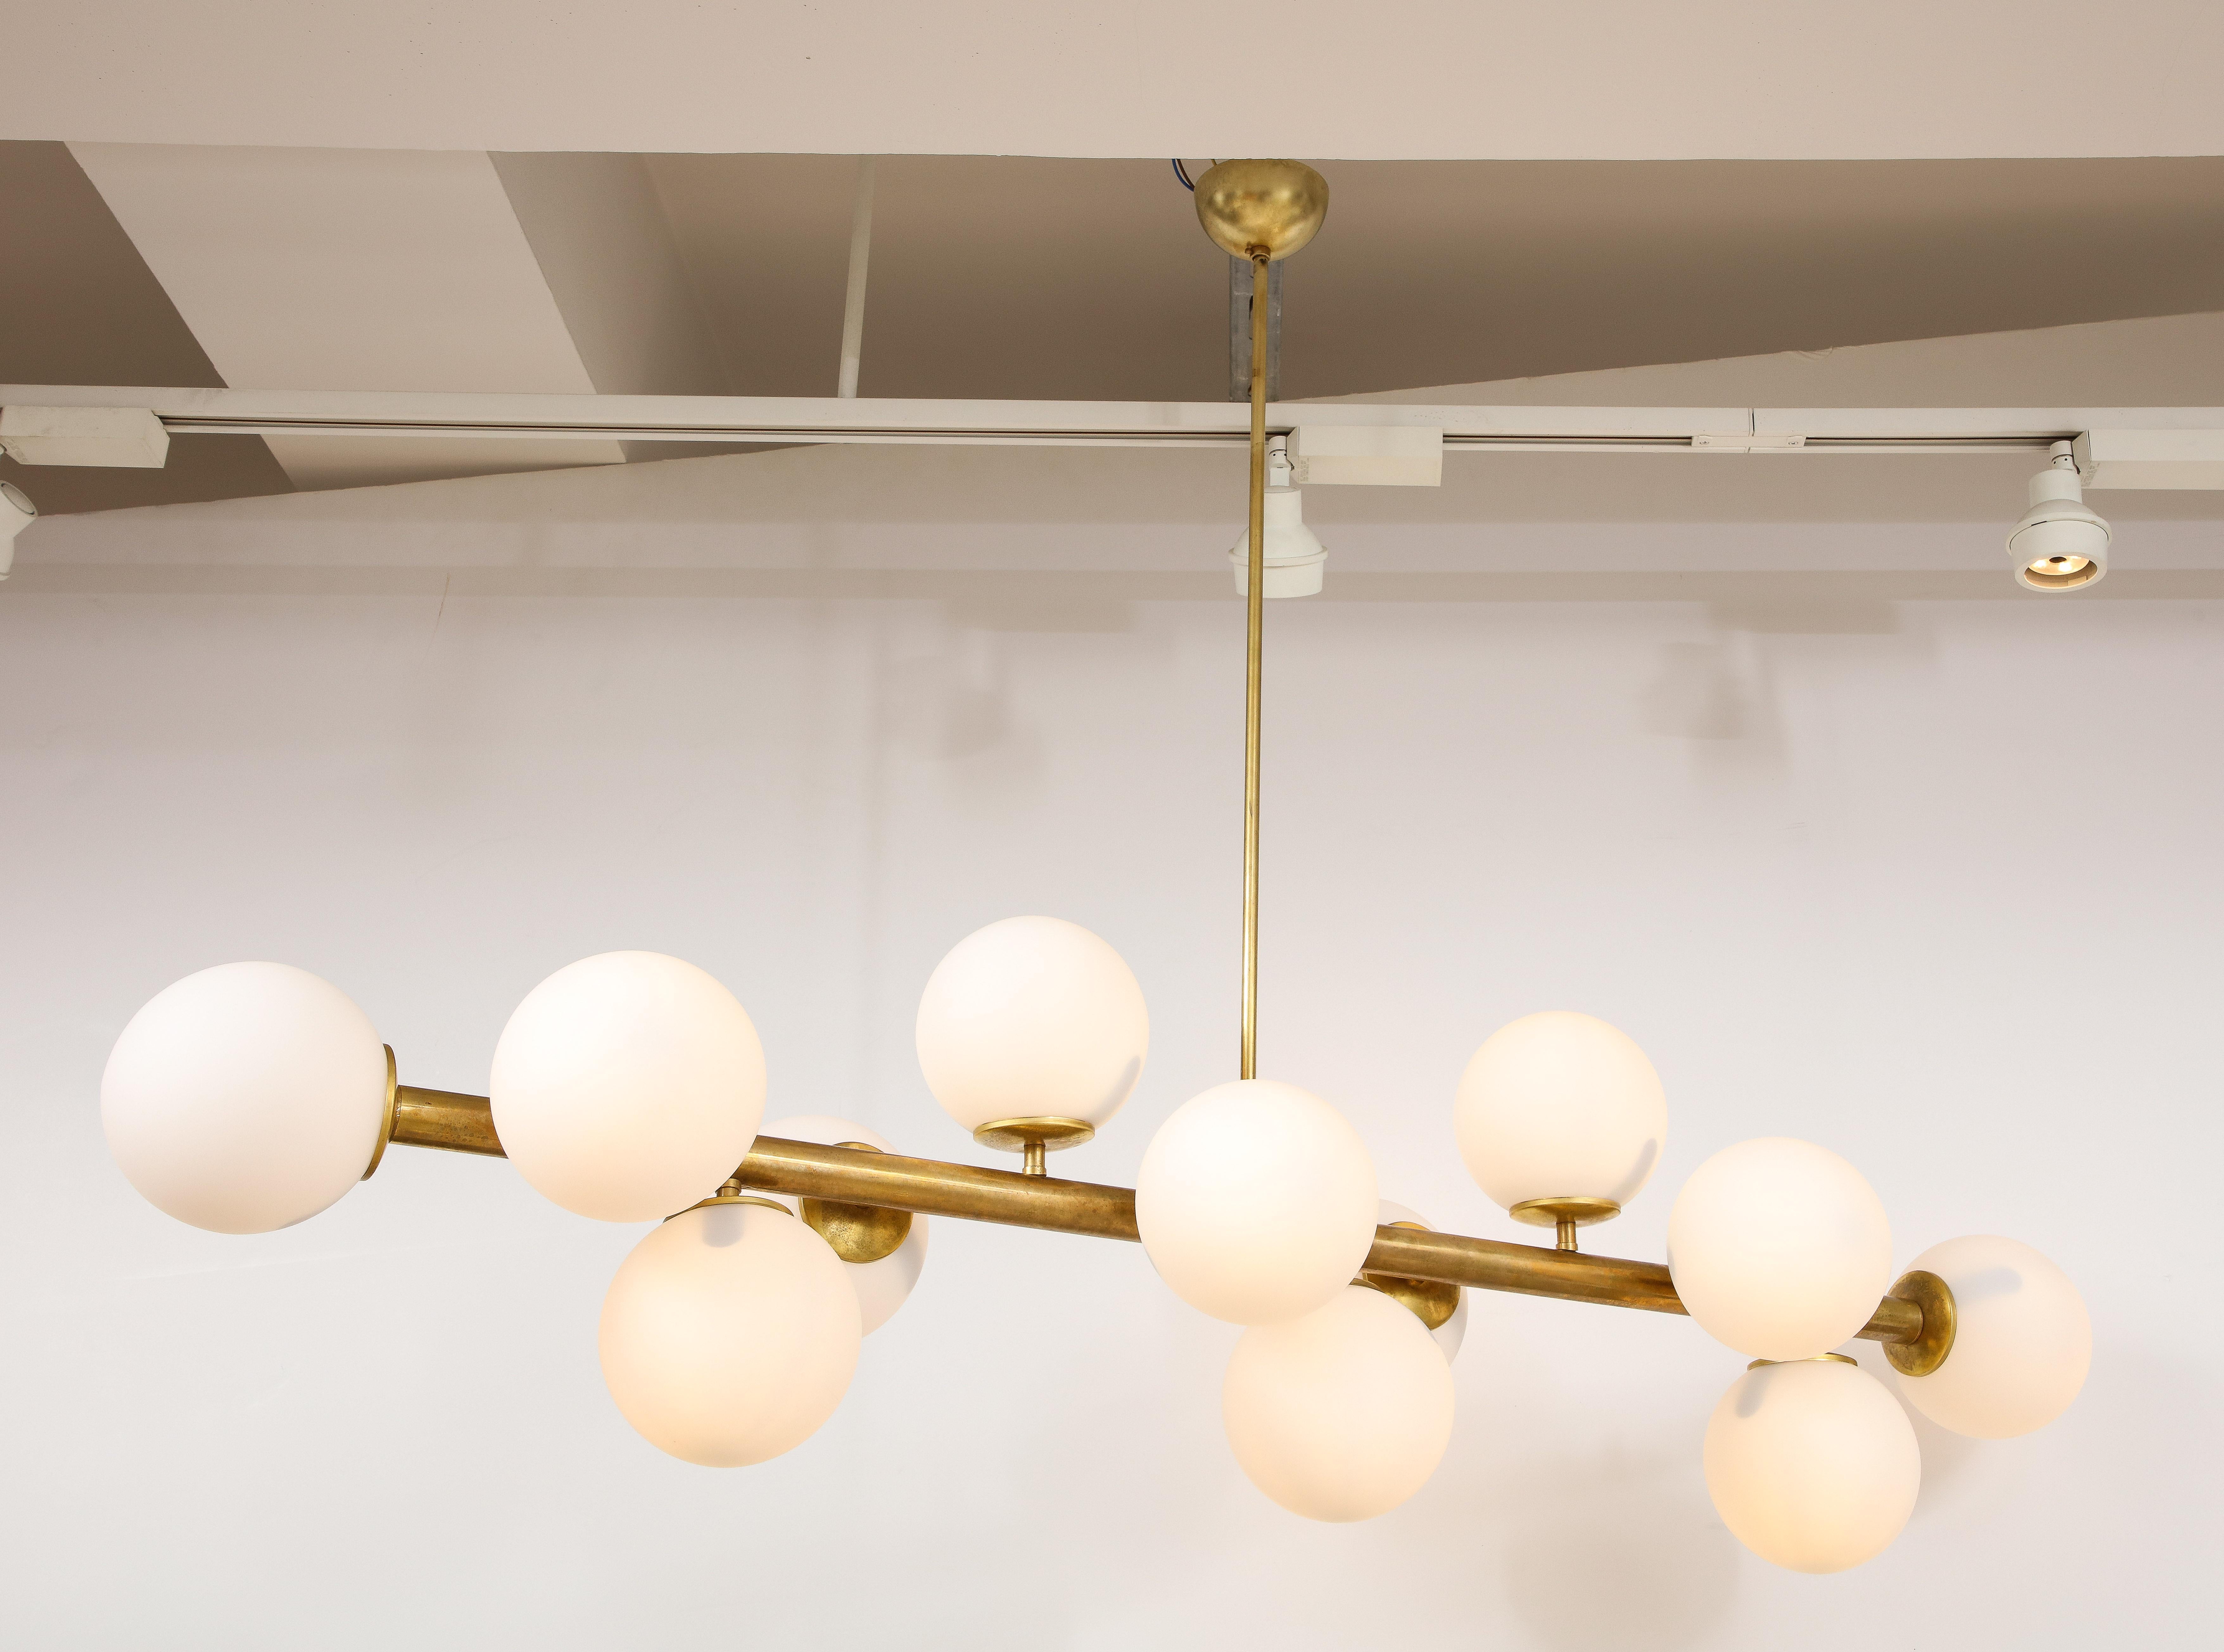 Italian Mid-Century Modern horizontal brass chandelier with twelve opaline glass globe light fixtures. A dramatic piece for any interior style. The brass with original warm patina. Re-wired for US standards. 
Italy, circa 1960 
Size: 34